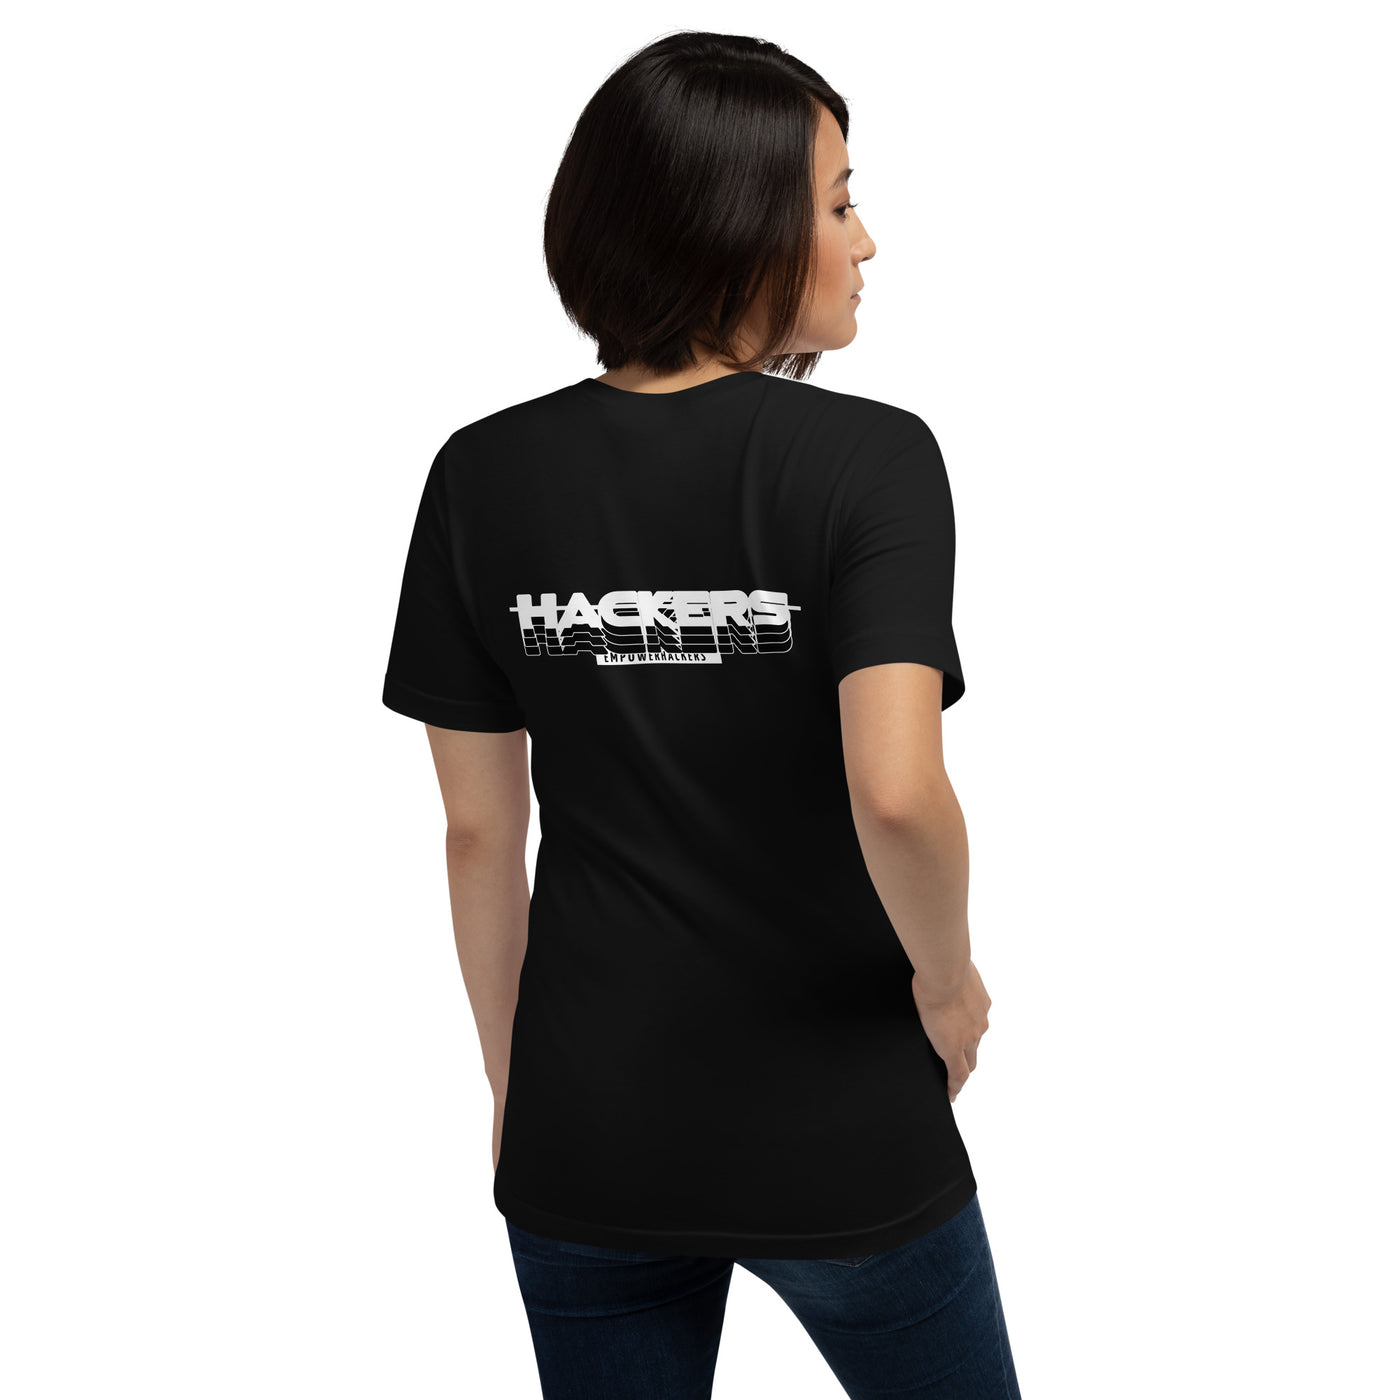 Hackers Empower Hackers V3 - Unisex t-shirt ( Back Print )